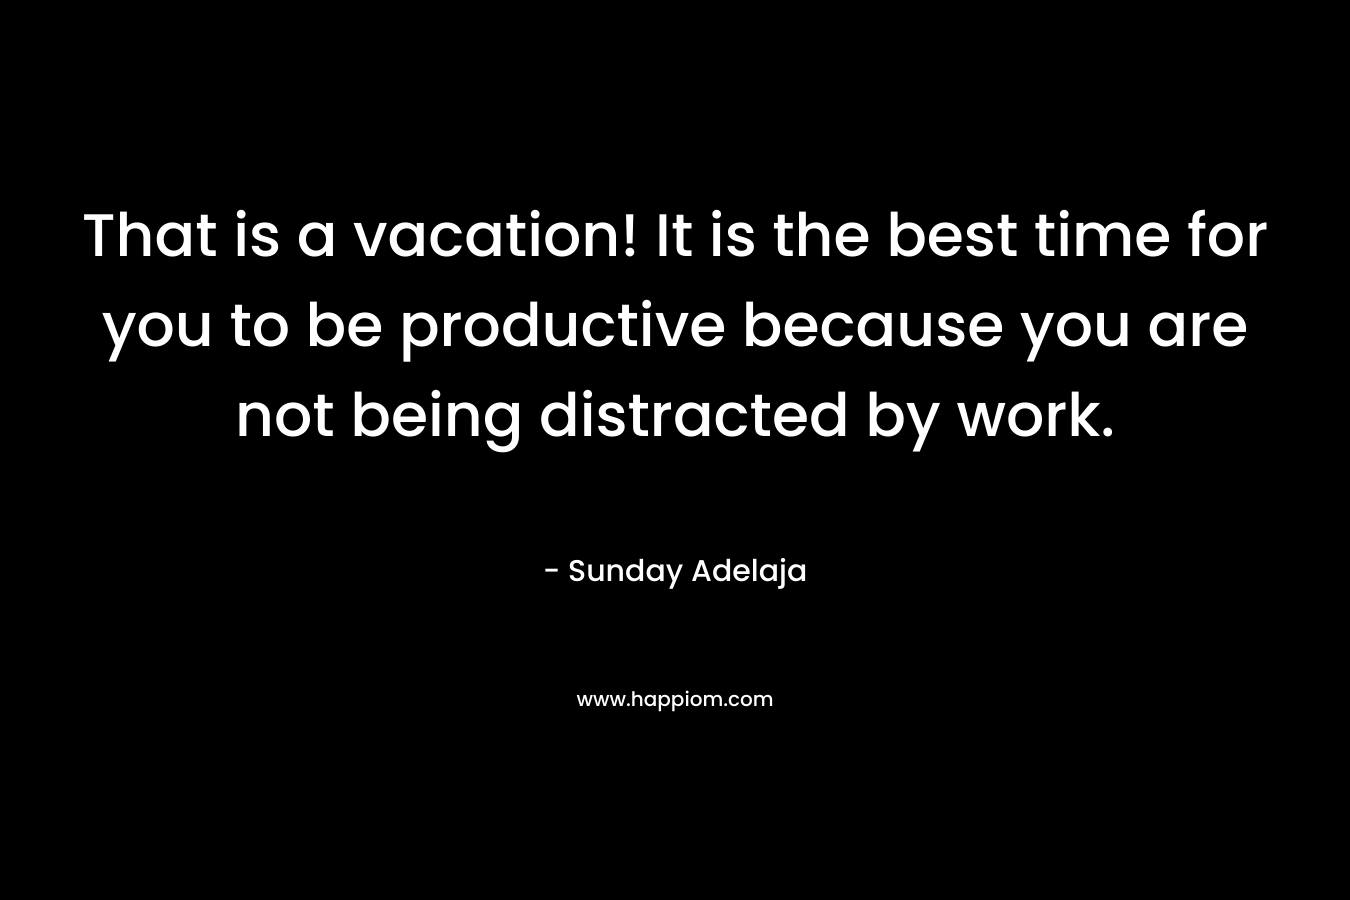 That is a vacation! It is the best time for you to be productive because you are not being distracted by work.